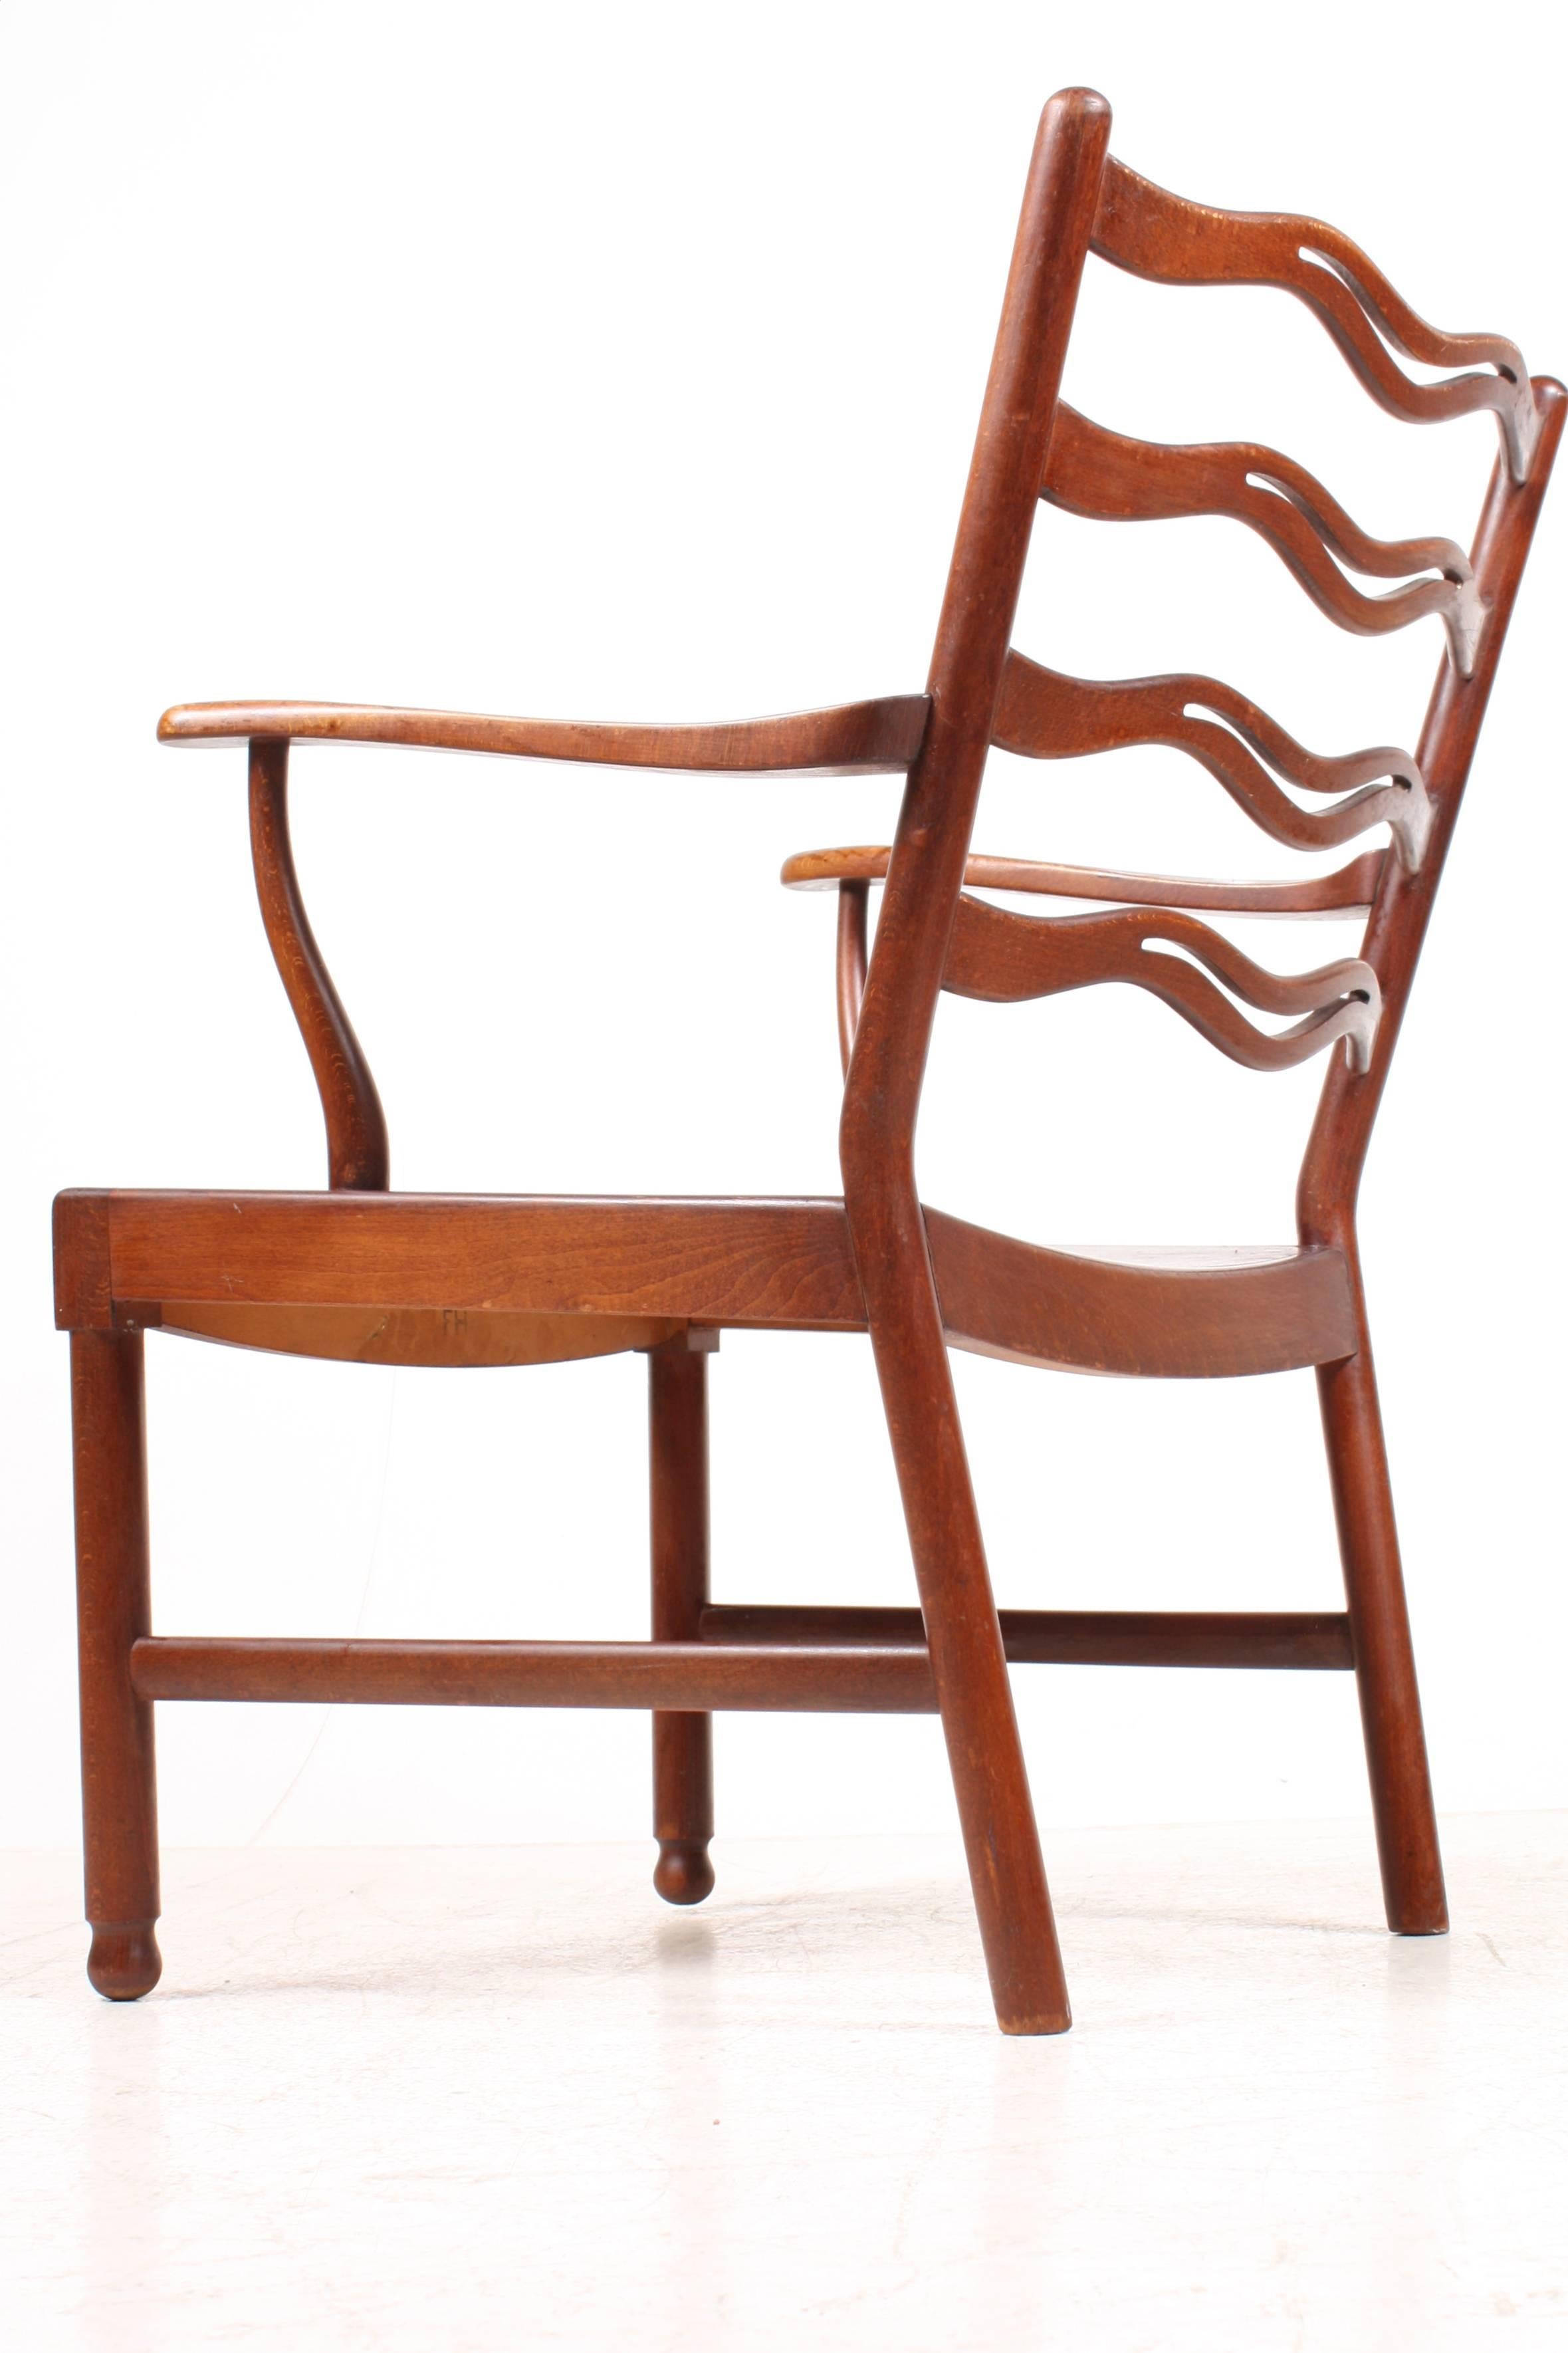 Pair of ladder back lounge chairs by Ole Wanscher designed for Fritz Hansen in the 1940s made in Denmark. Great original condition.